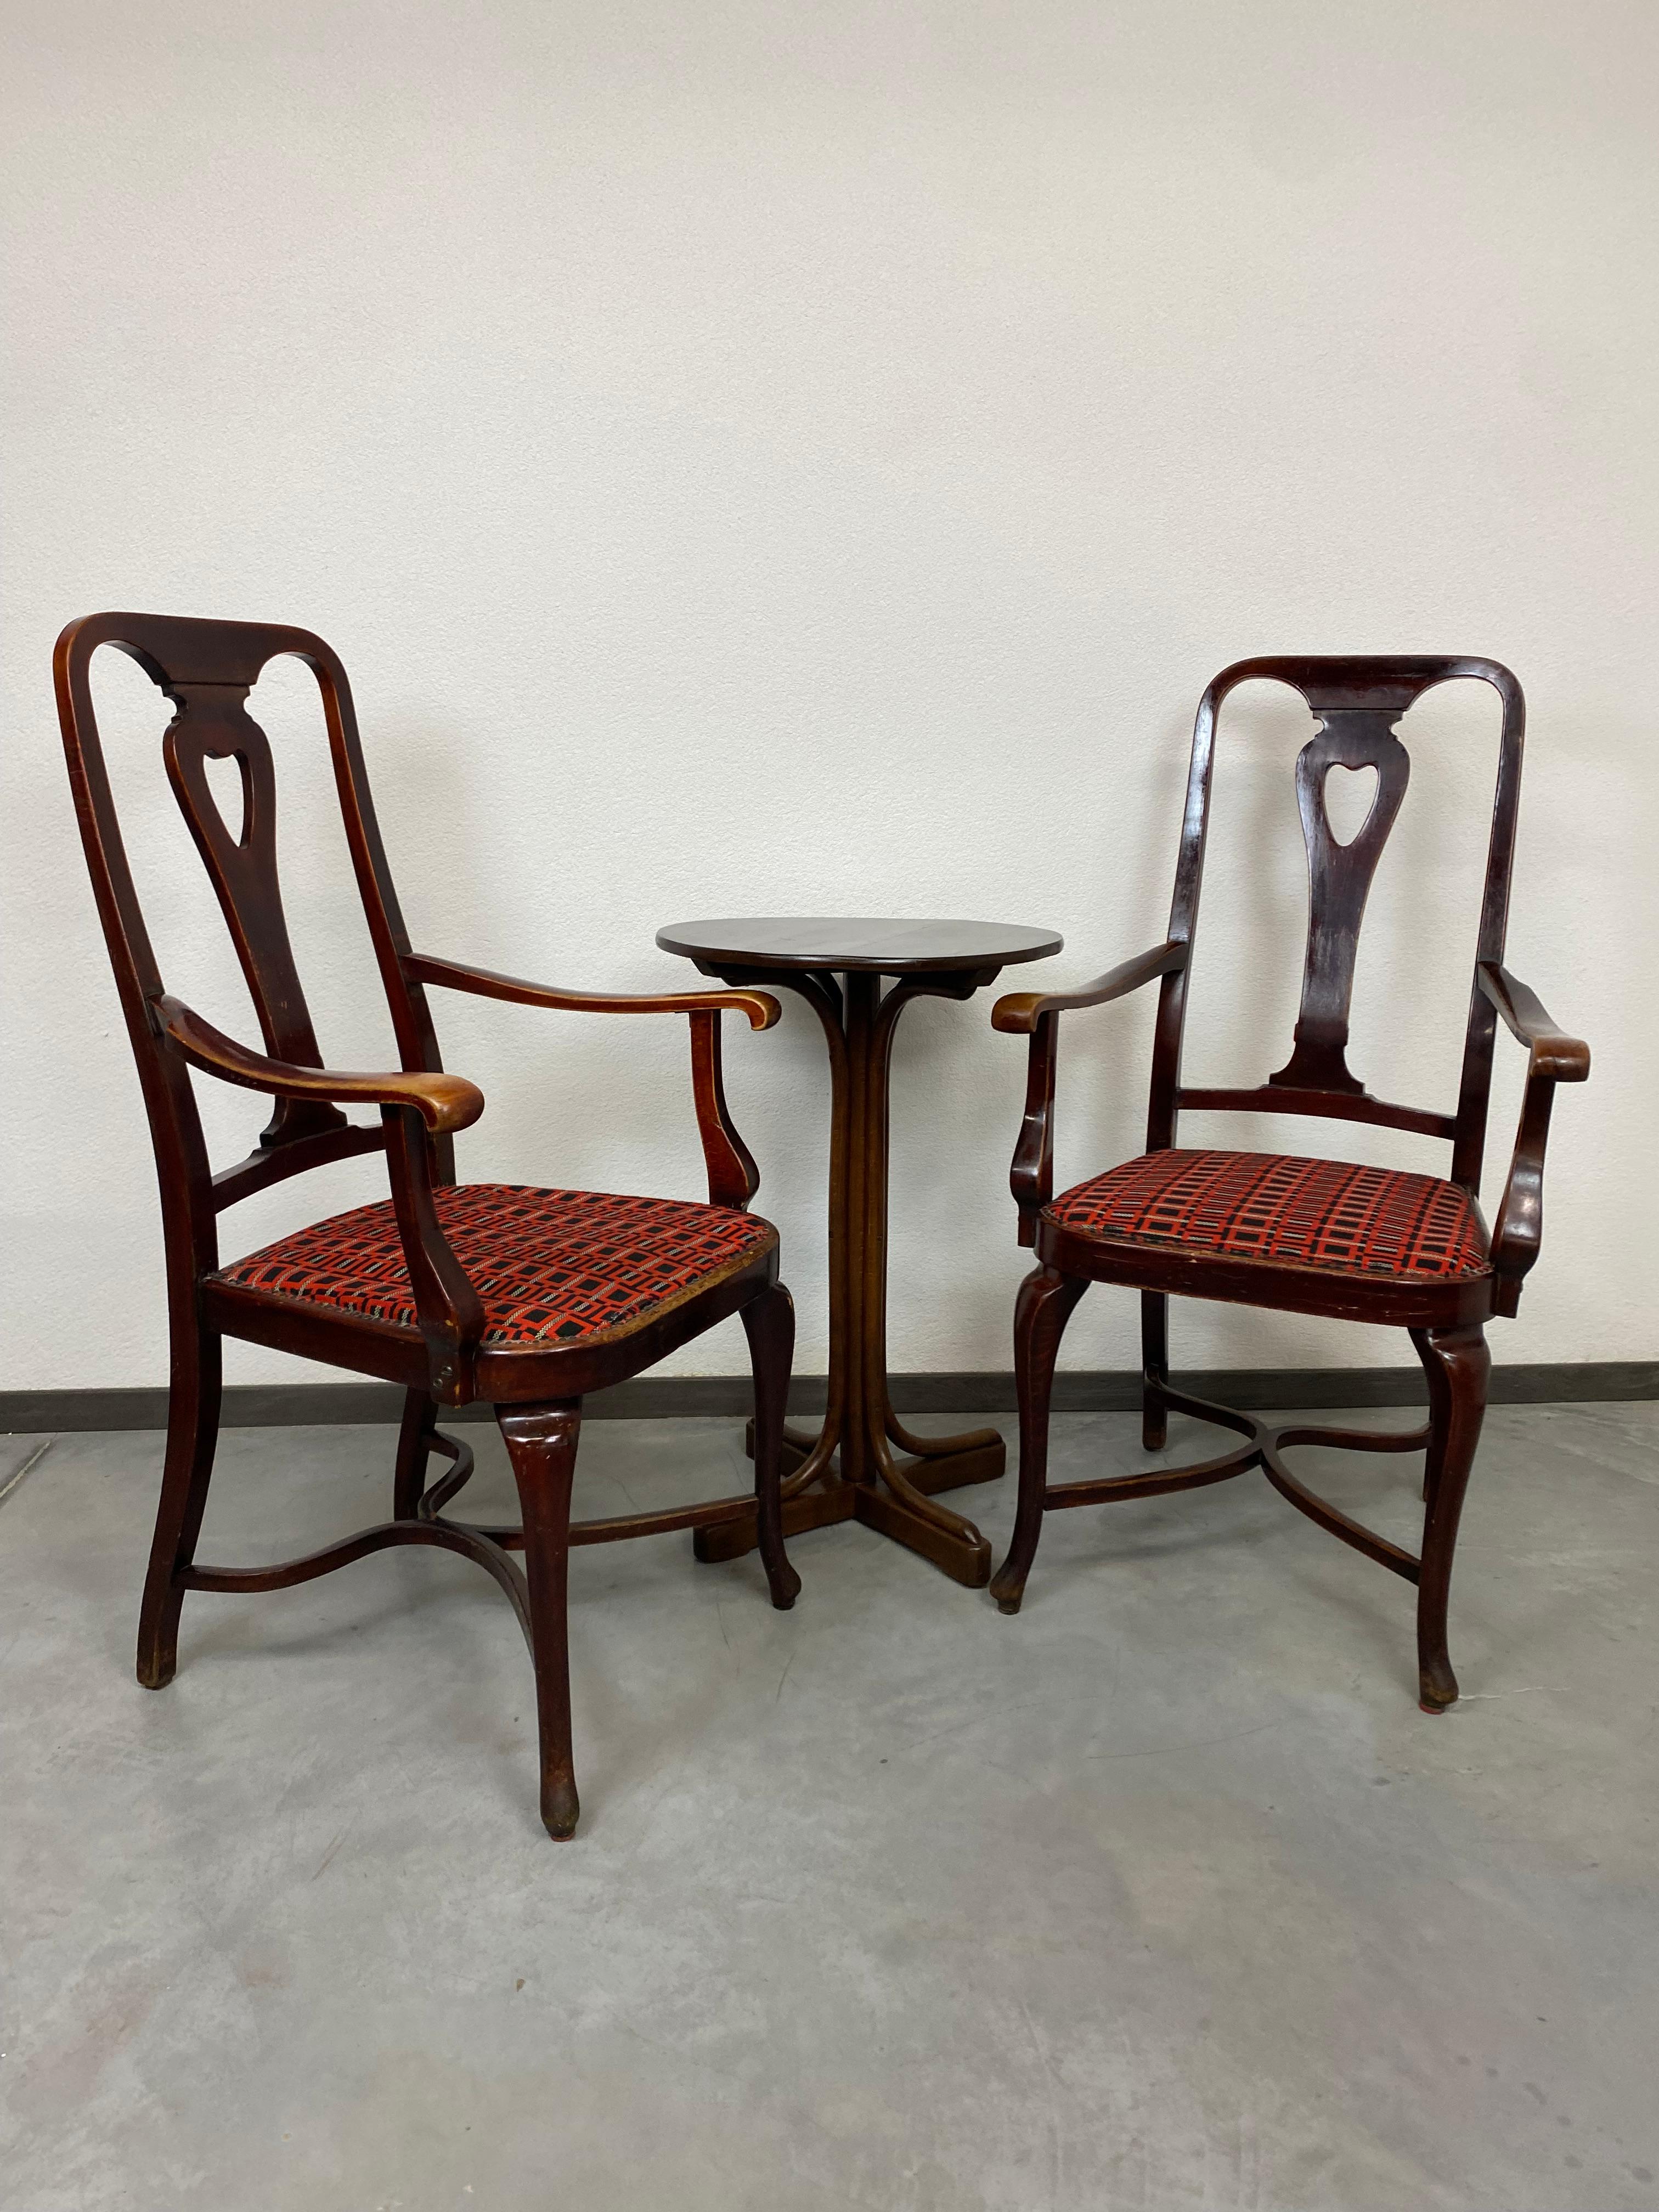 Early 20th Century Pair of Secession Armchairs Atr. Adolf Loos Ex. by Thonet For Sale